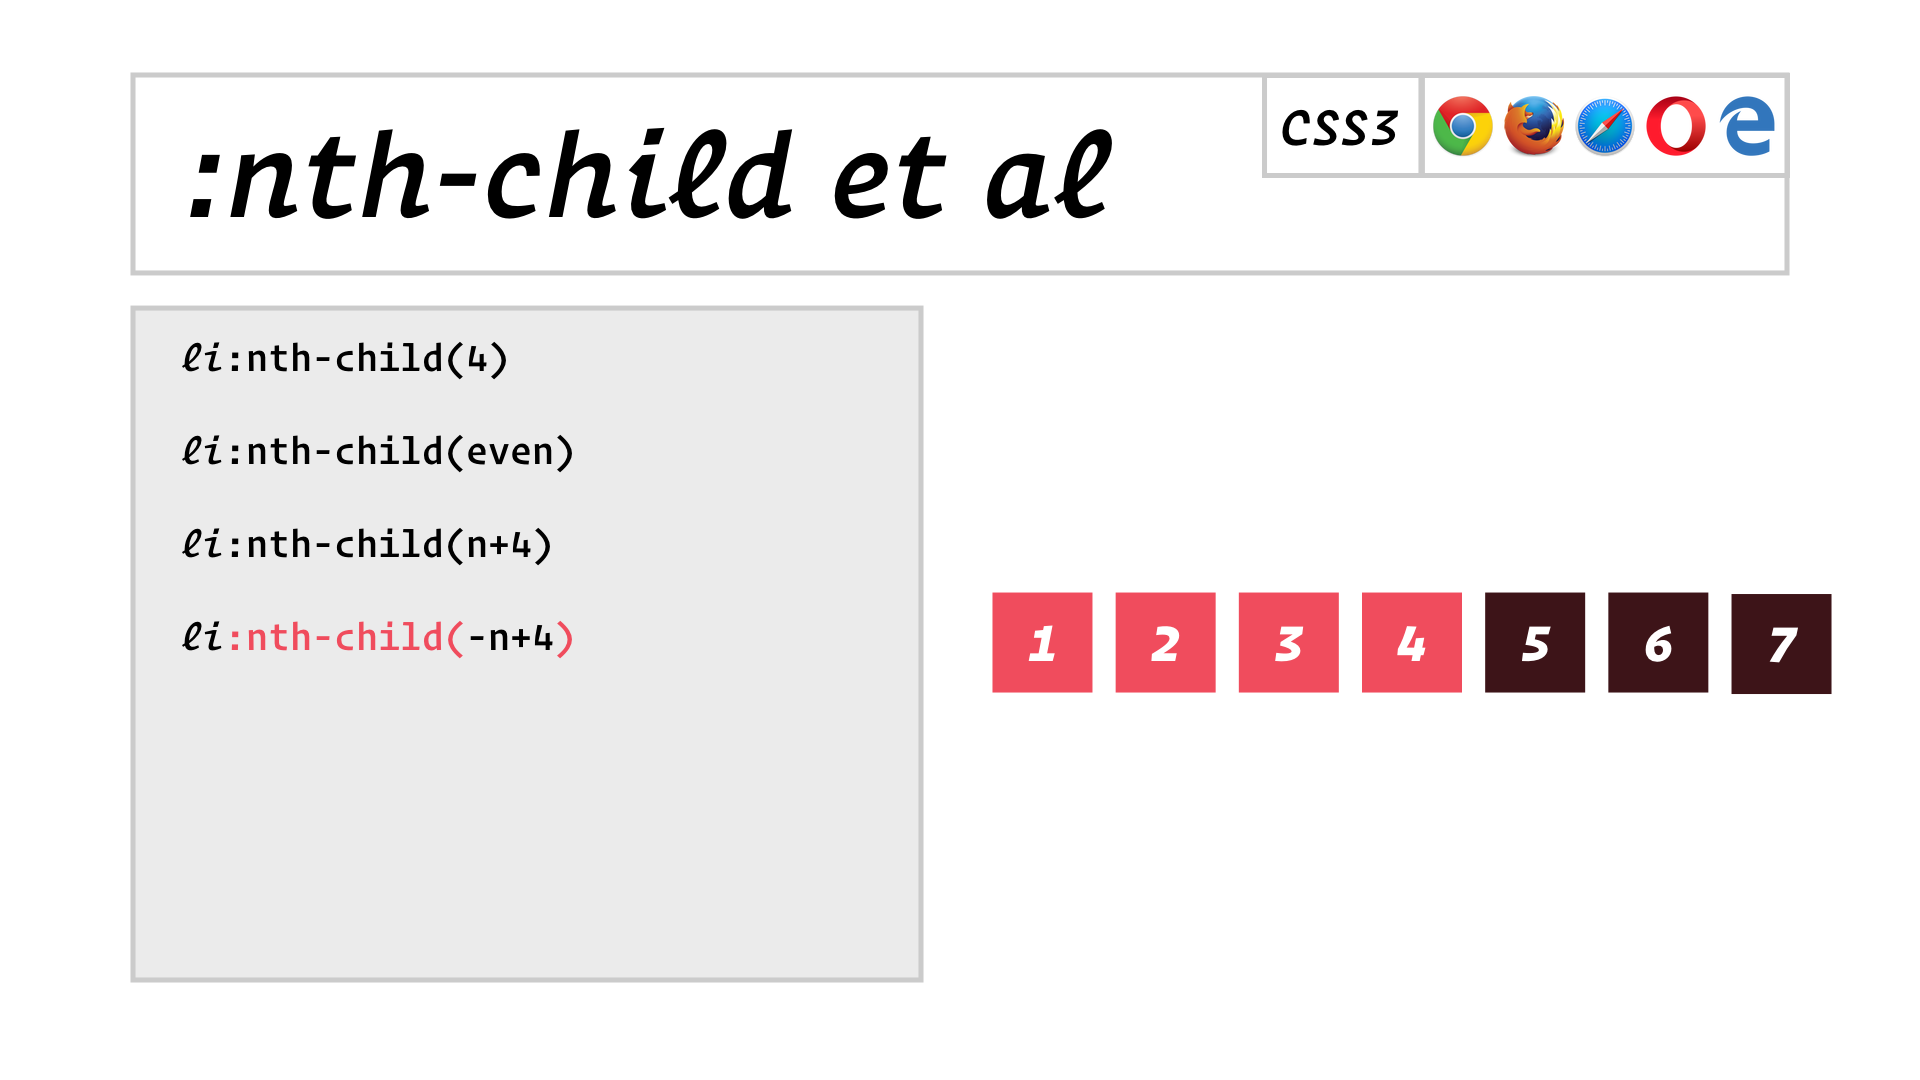 slide: :nth-child(-n+4) selects the 1st, 2nd, 3rd and 4th child